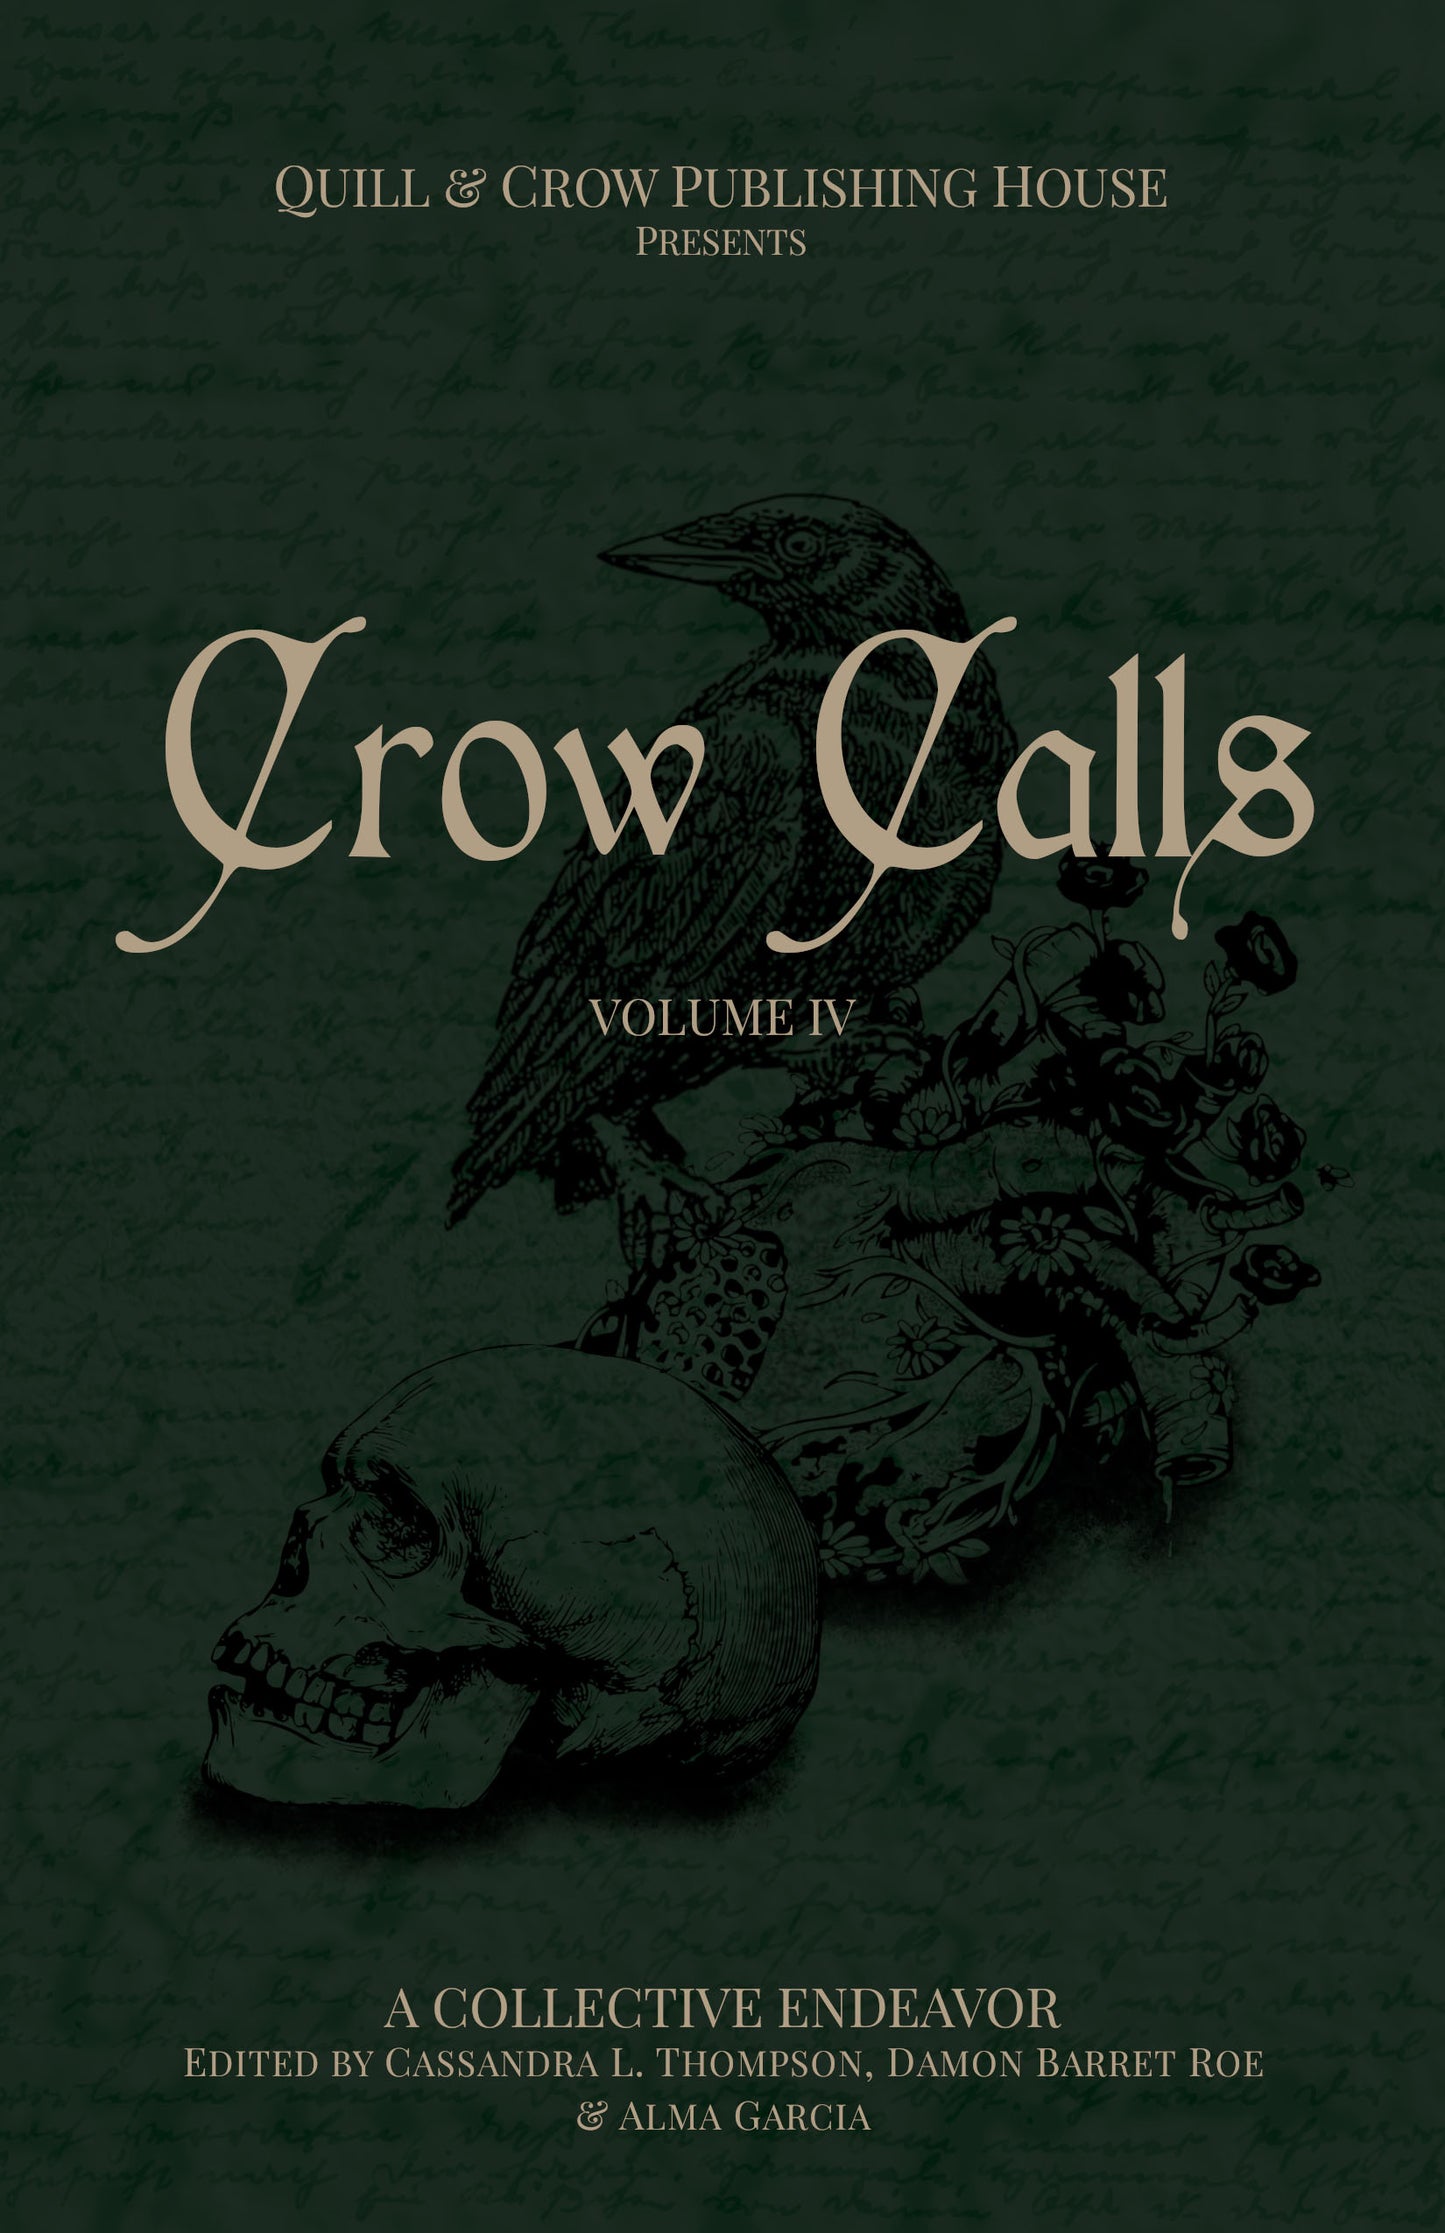 The Crow Calls Volumes. Quill & Crow Publishing House. Cassandra L. Thompson.